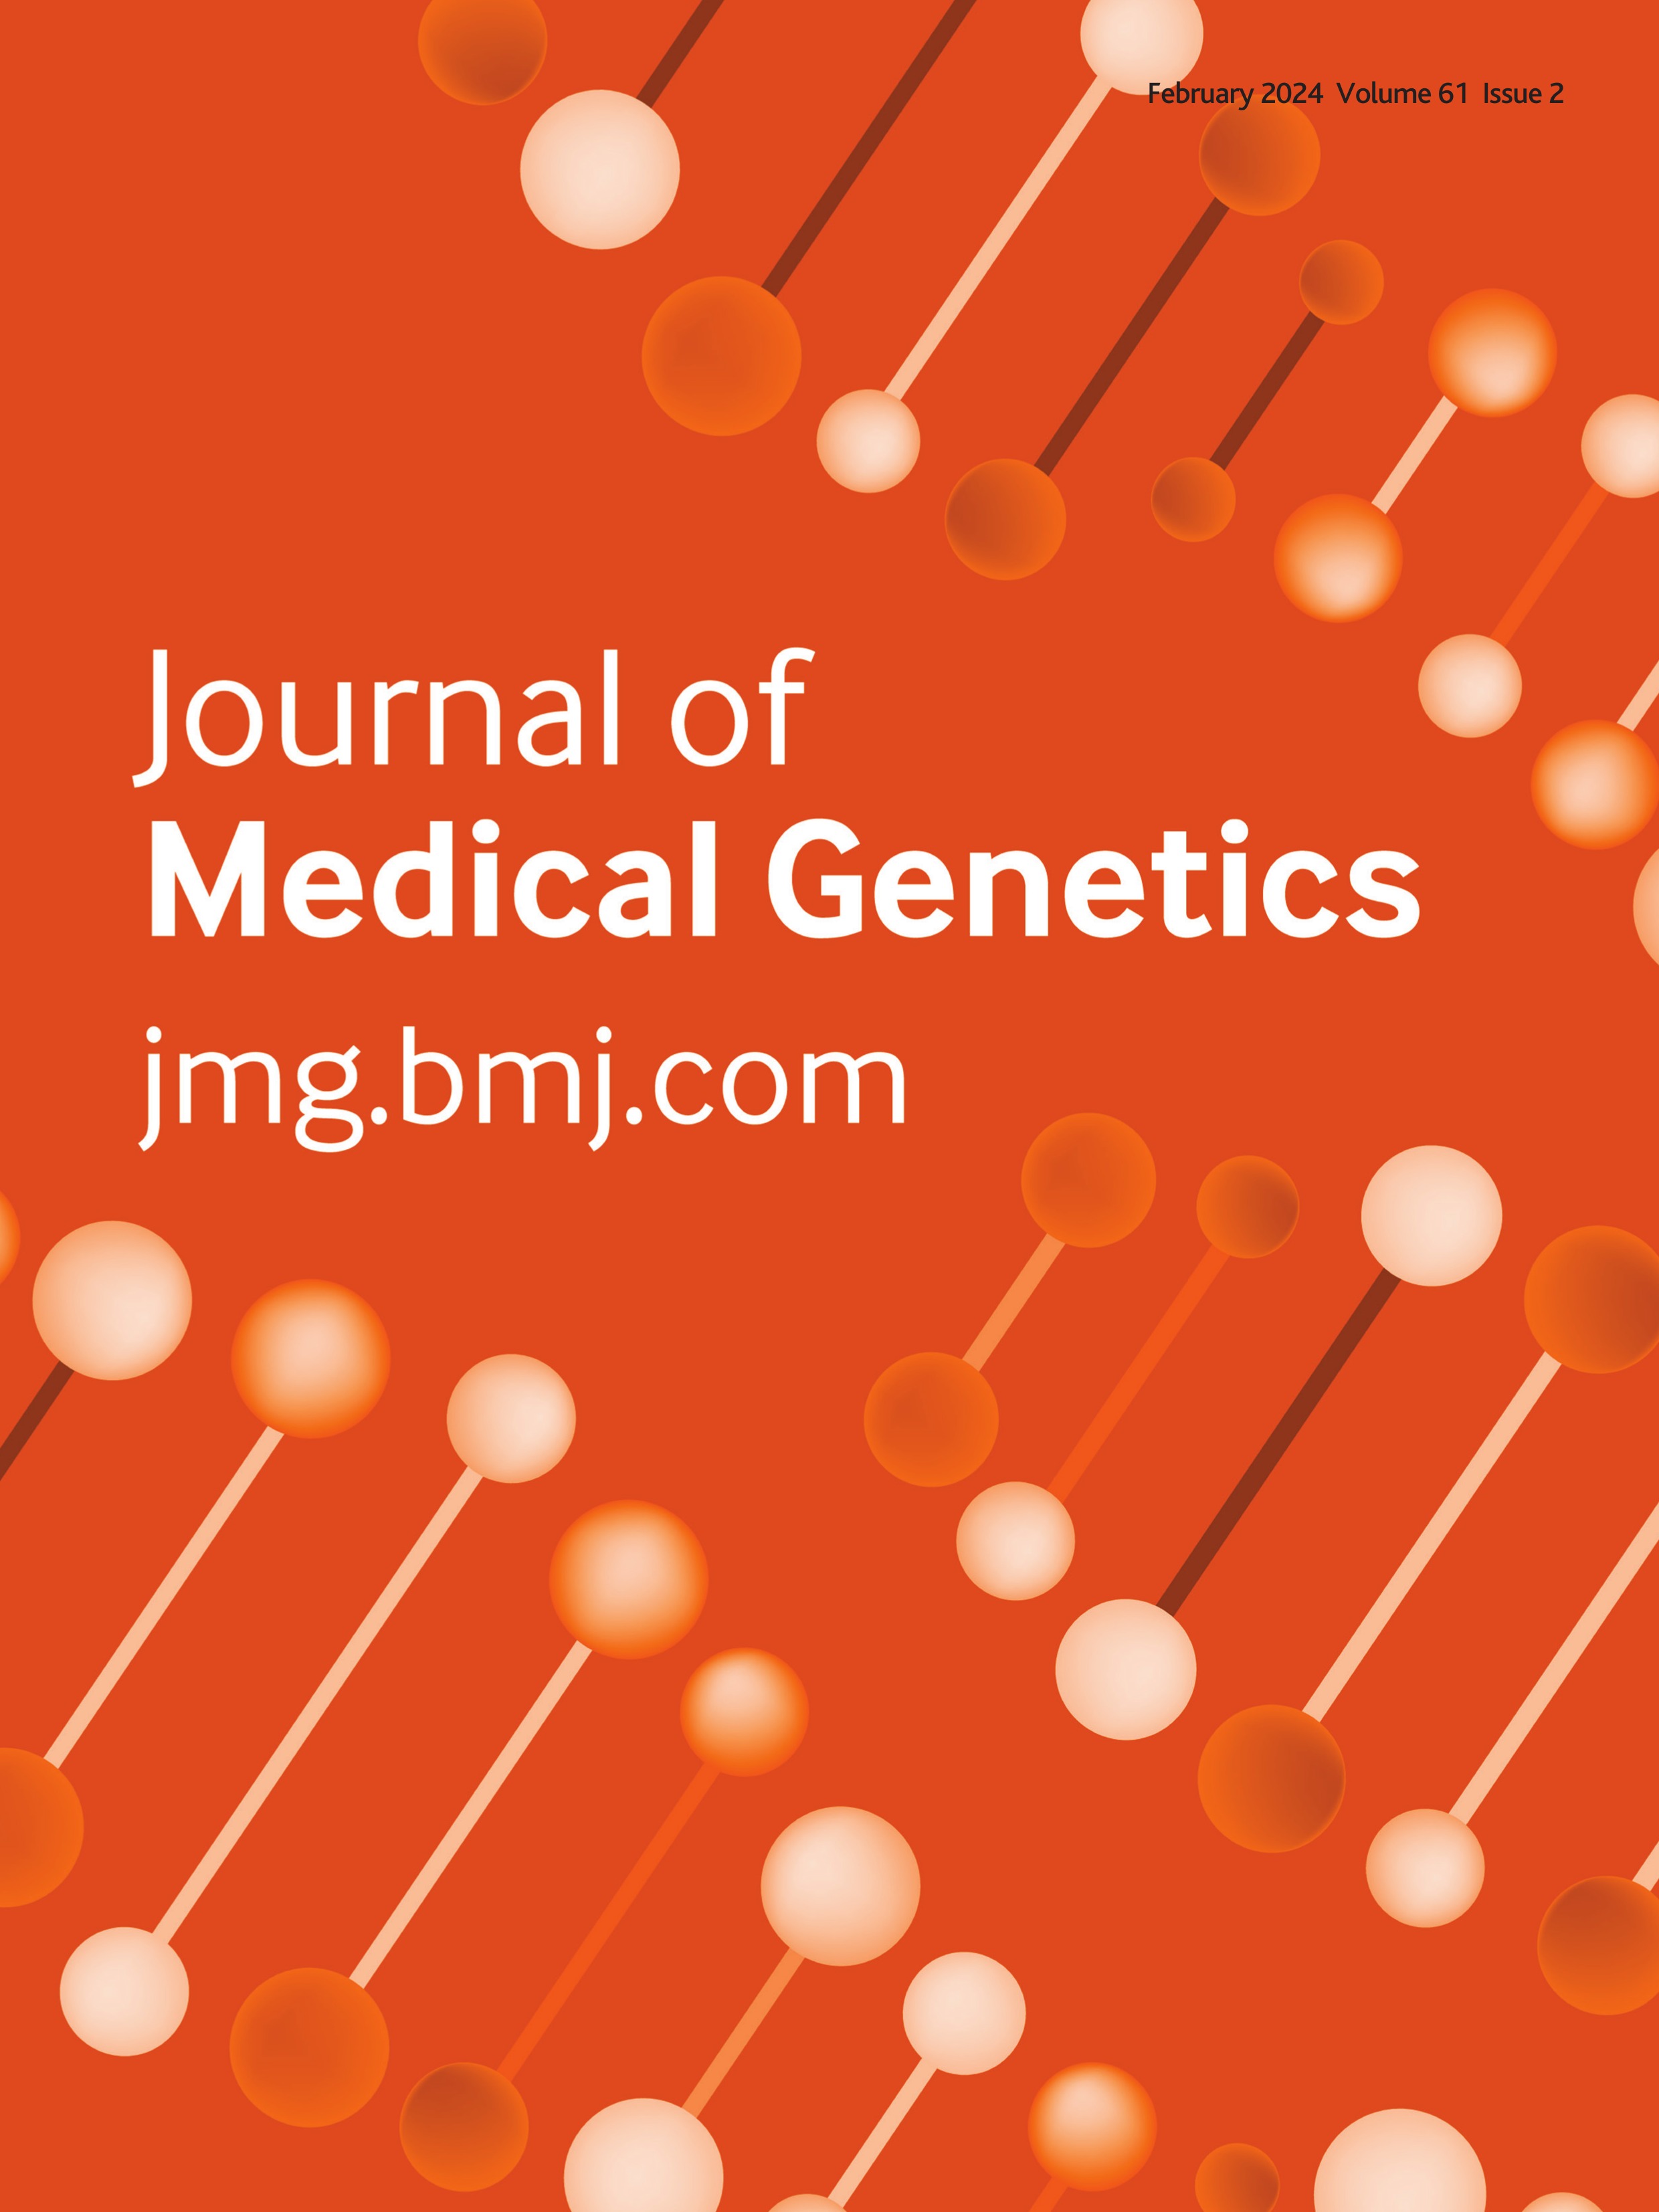 Neurofibromatosis type 1 mosaicism in patients with constitutional mismatch repair deficiency